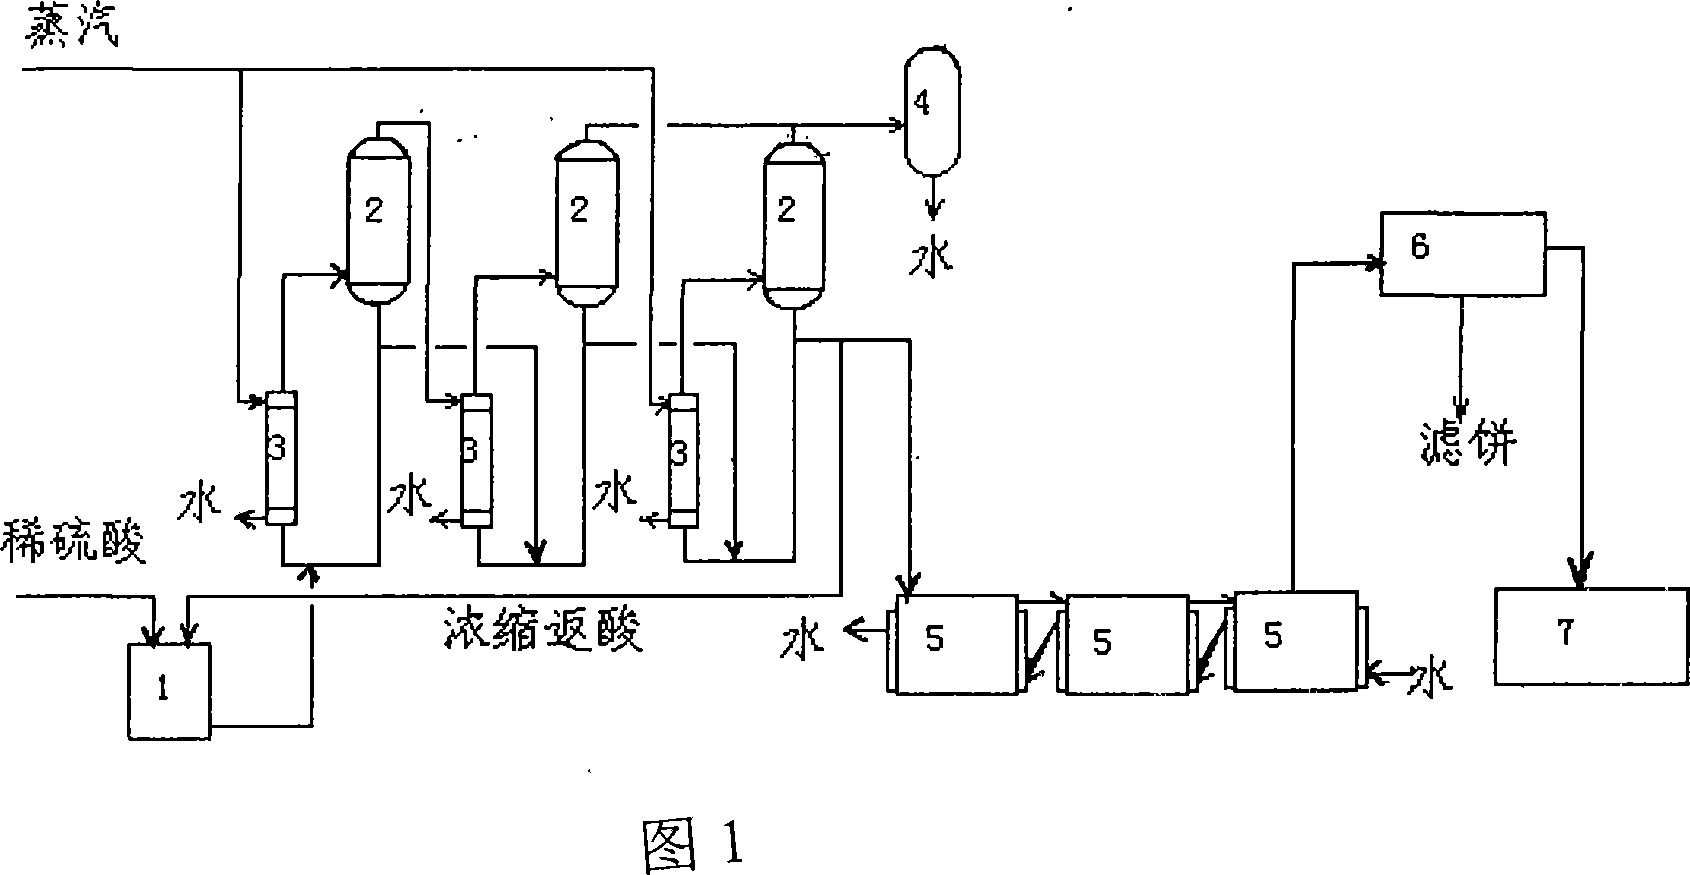 Concentrating and impurity removing method for dilute sulfuric acid in titanium dioxide powder production process by employing sulfuric acid process